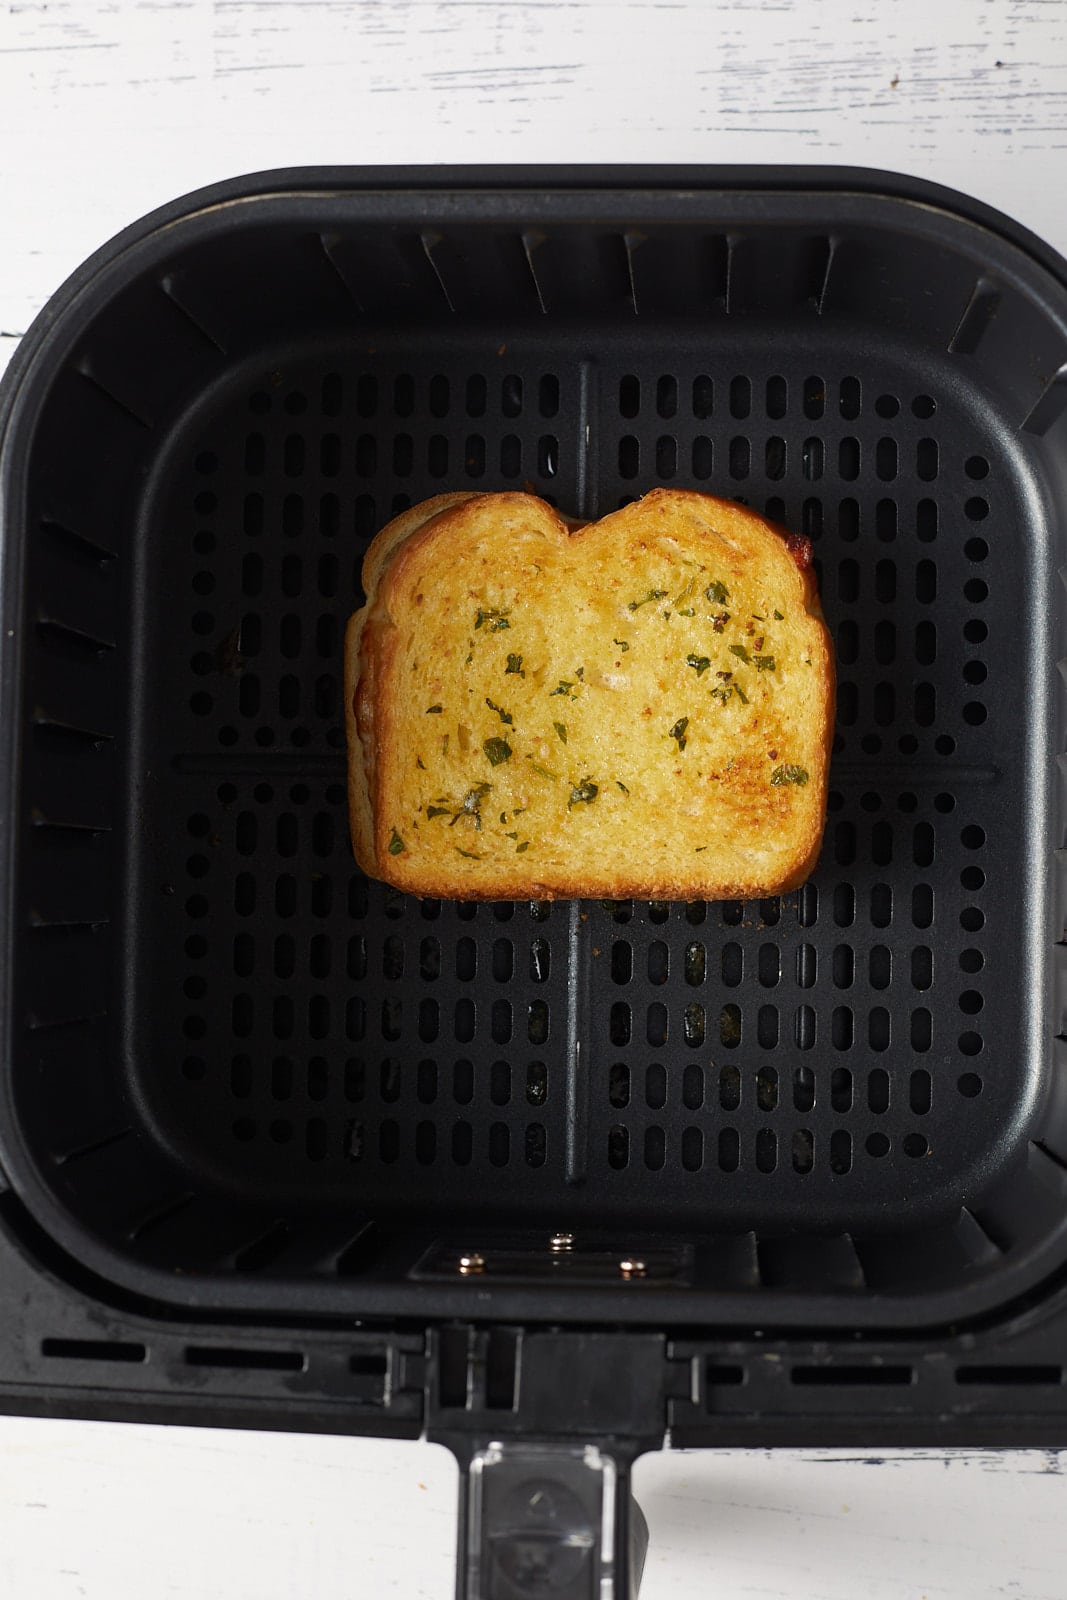 The grilled cheese in an air fryer basket.